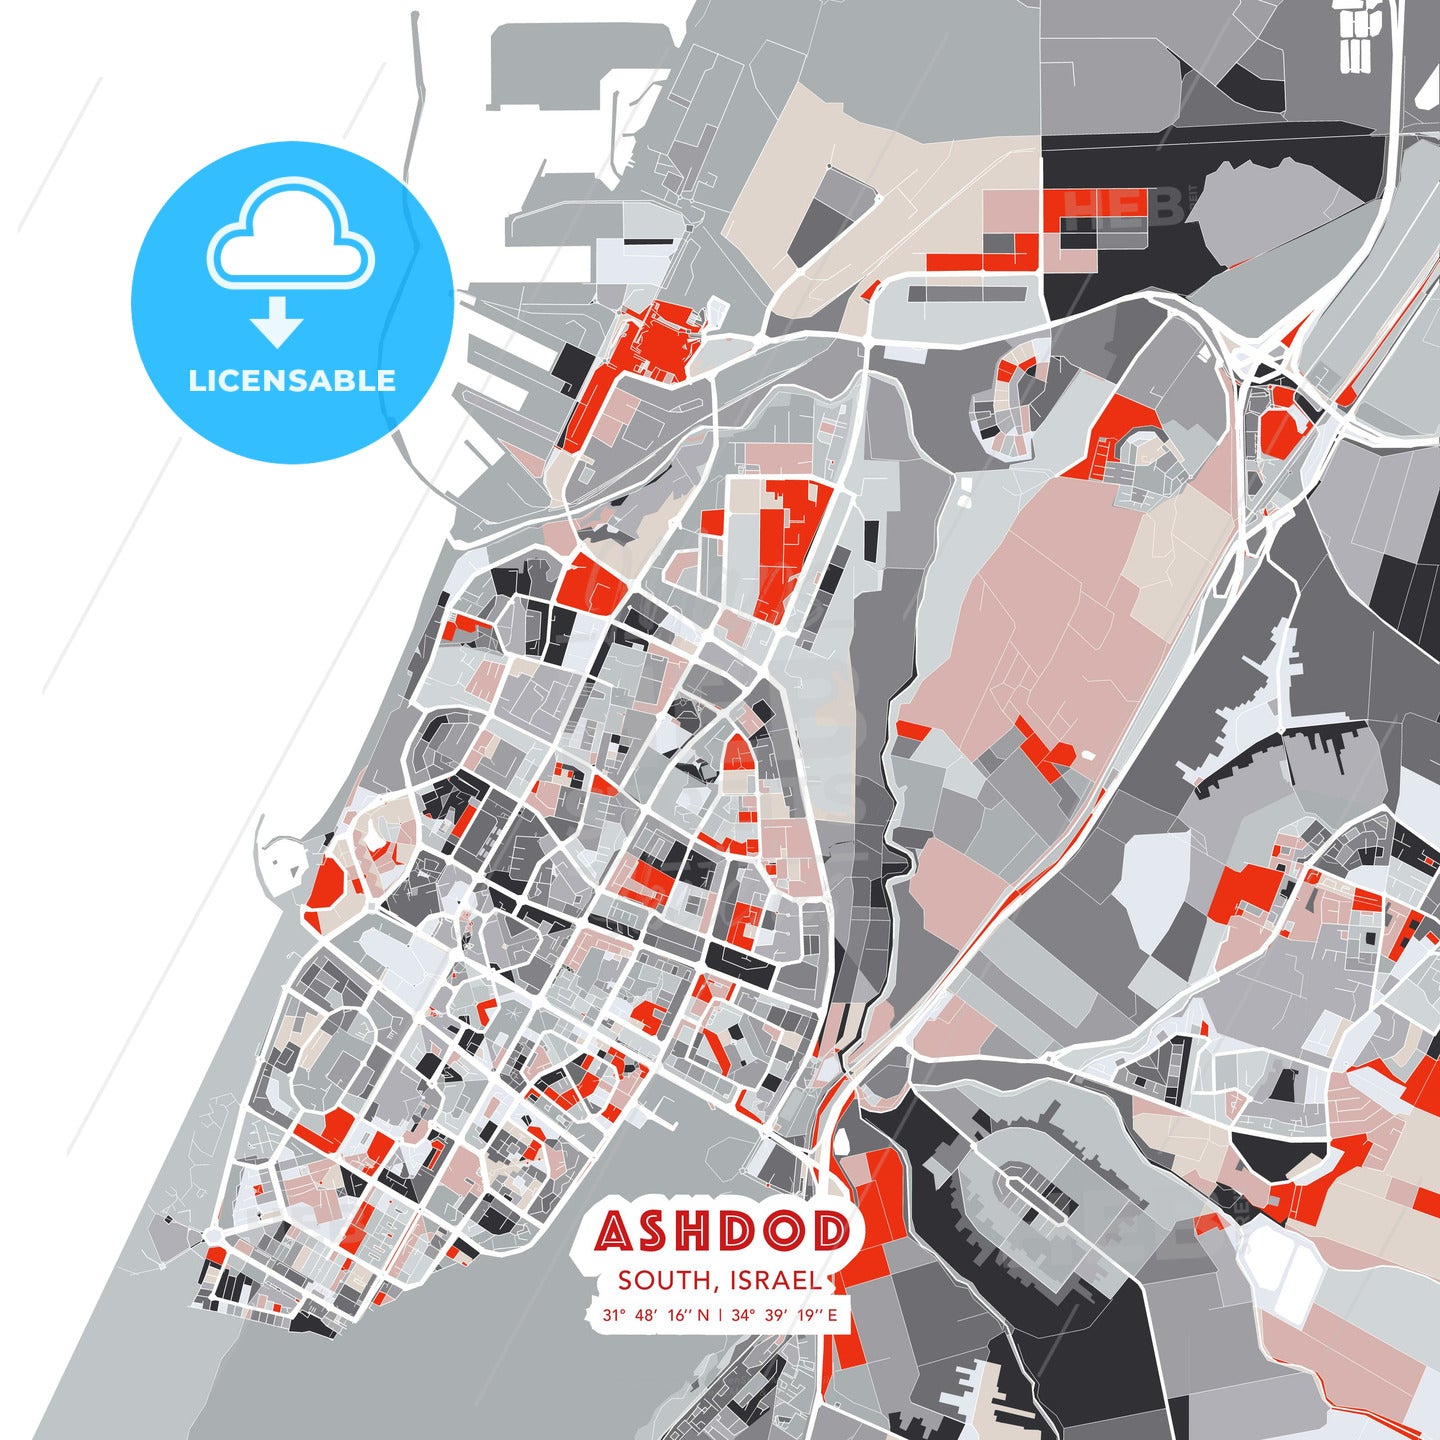 Ashdod, South, Israel, modern map - HEBSTREITS Sketches